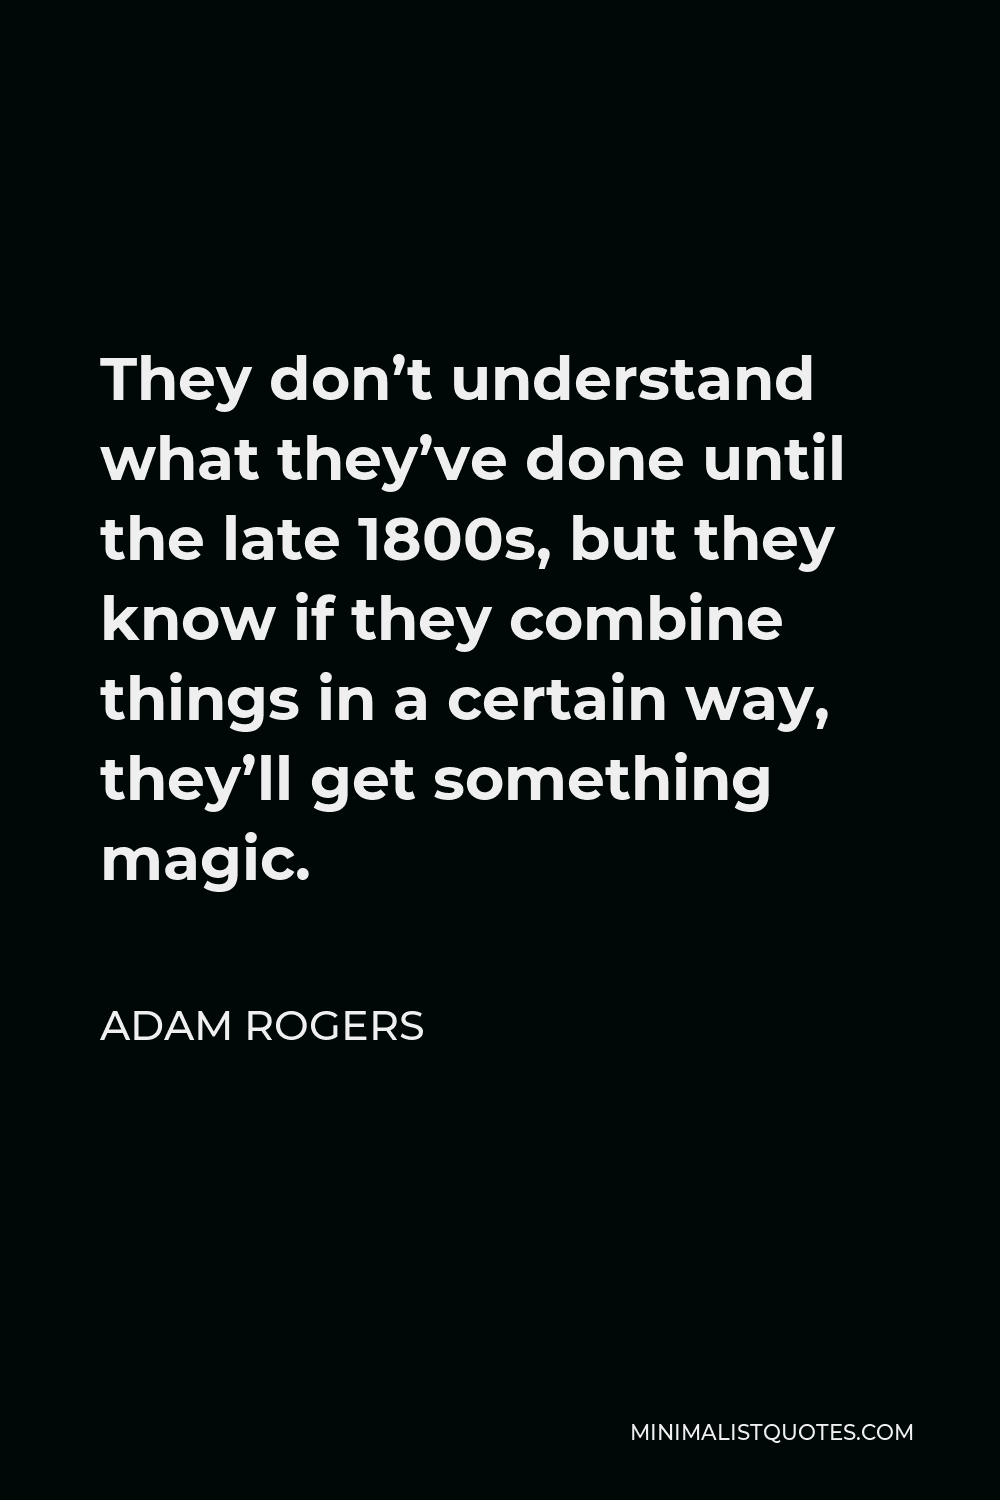 Adam Rogers Quote - They don’t understand what they’ve done until the late 1800s, but they know if they combine things in a certain way, they’ll get something magic.